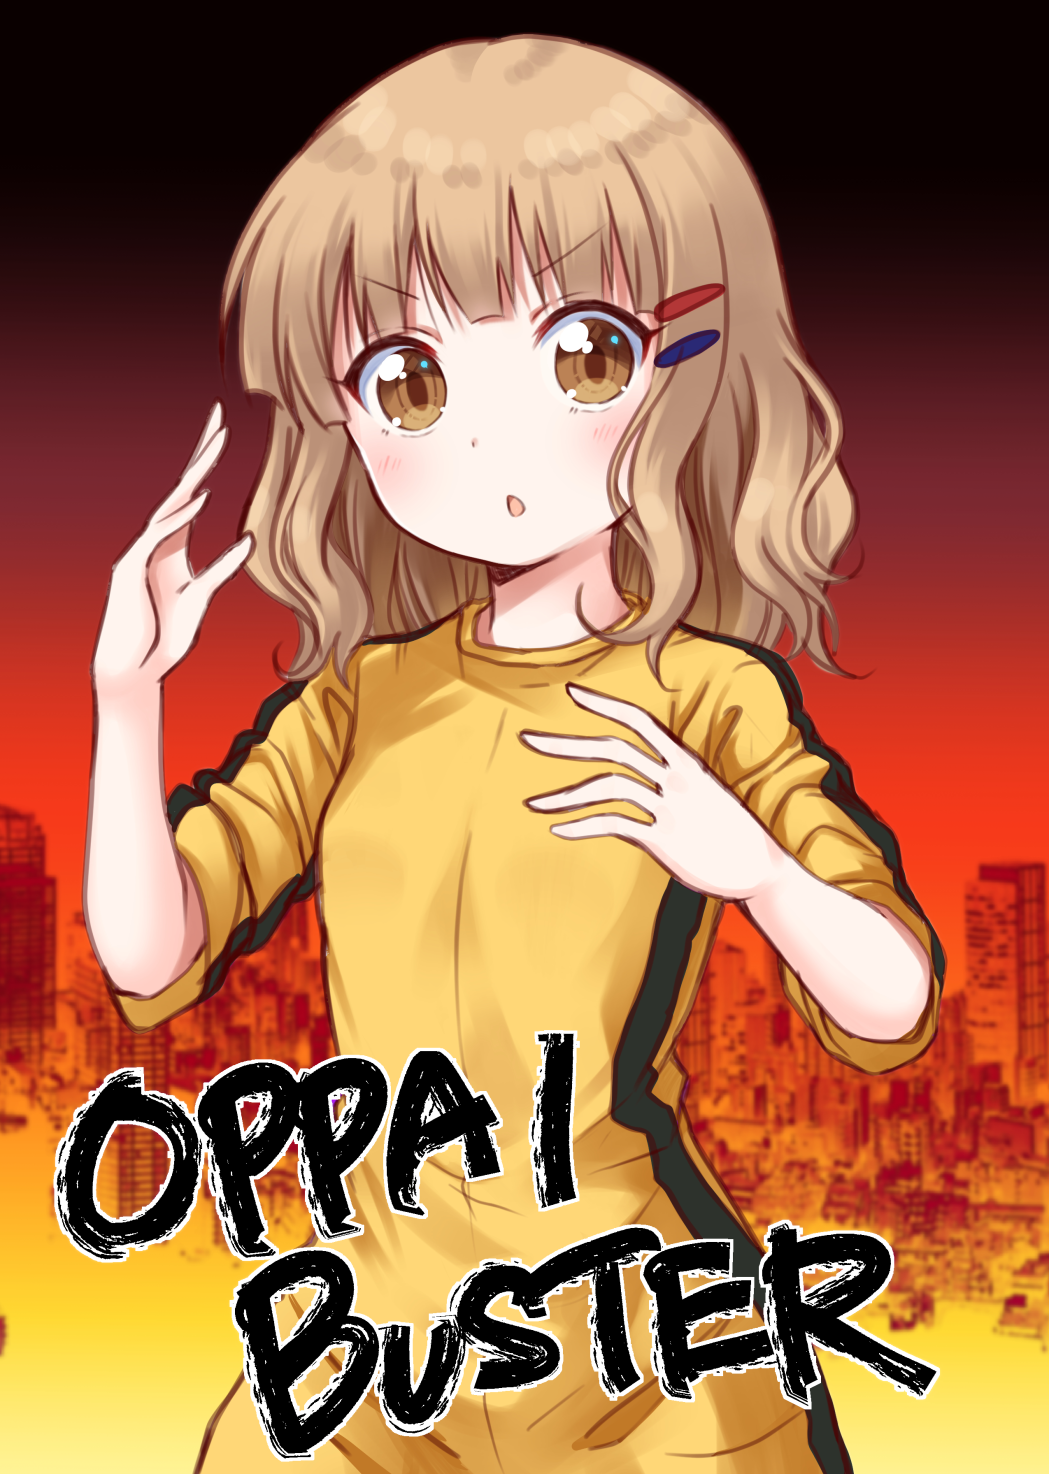 1girl bangs blonde_hair brown_eyes bruce_lee's_jumpsuit cityscape commentary_request english_text eyebrows_visible_through_hair hair_ornament hairclip highres jumpsuit looking_at_viewer medium_hair multicolored multicolored_background oomuro_sakurako open_mouth romaji_text serious sleeves_rolled_up solo usagi_koushaku v-shaped_eyebrows yuru_yuri